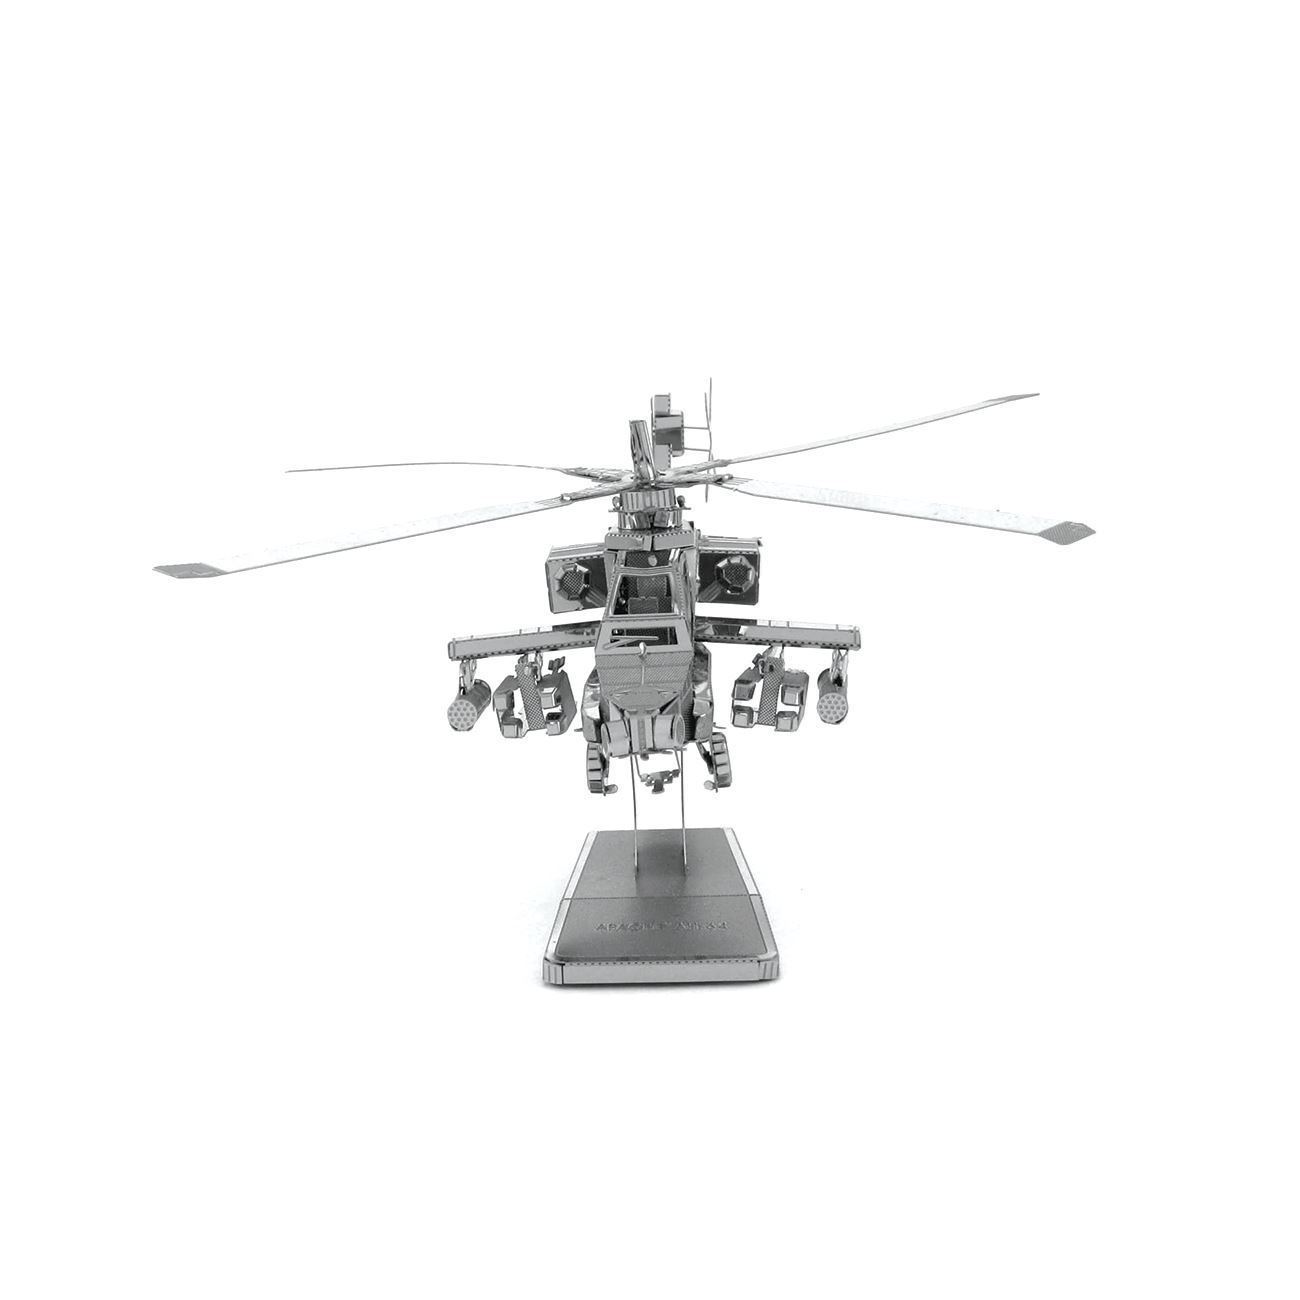 3D METAL MODEL KIT HELICOPTER AH-64 APACHE FASCINATIONS METAL EARTH ADVANCED 